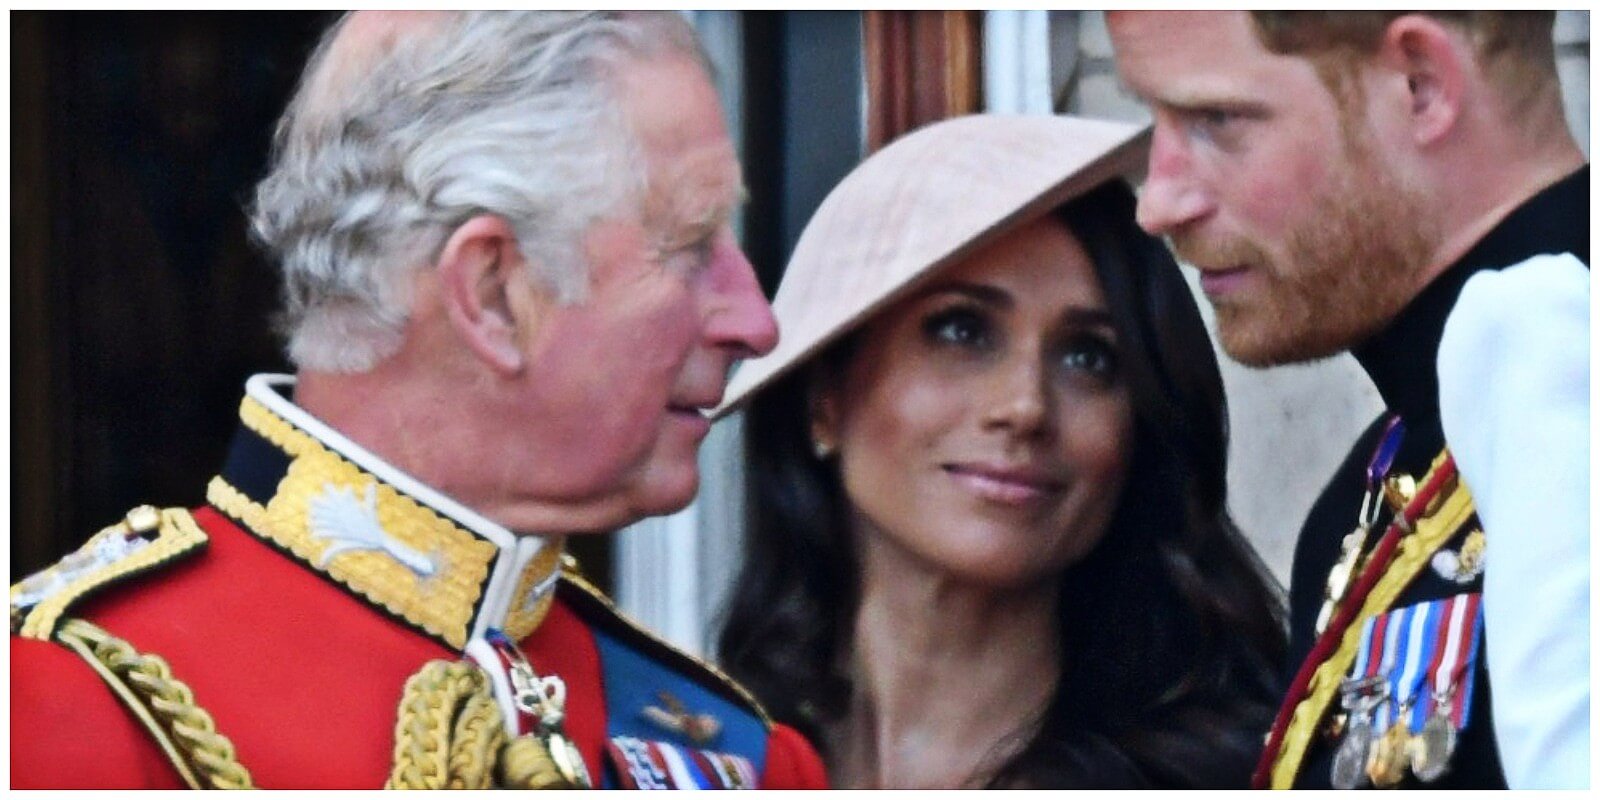 King Charles, Meghan Markle, and Prince Harry photographed in 2018.